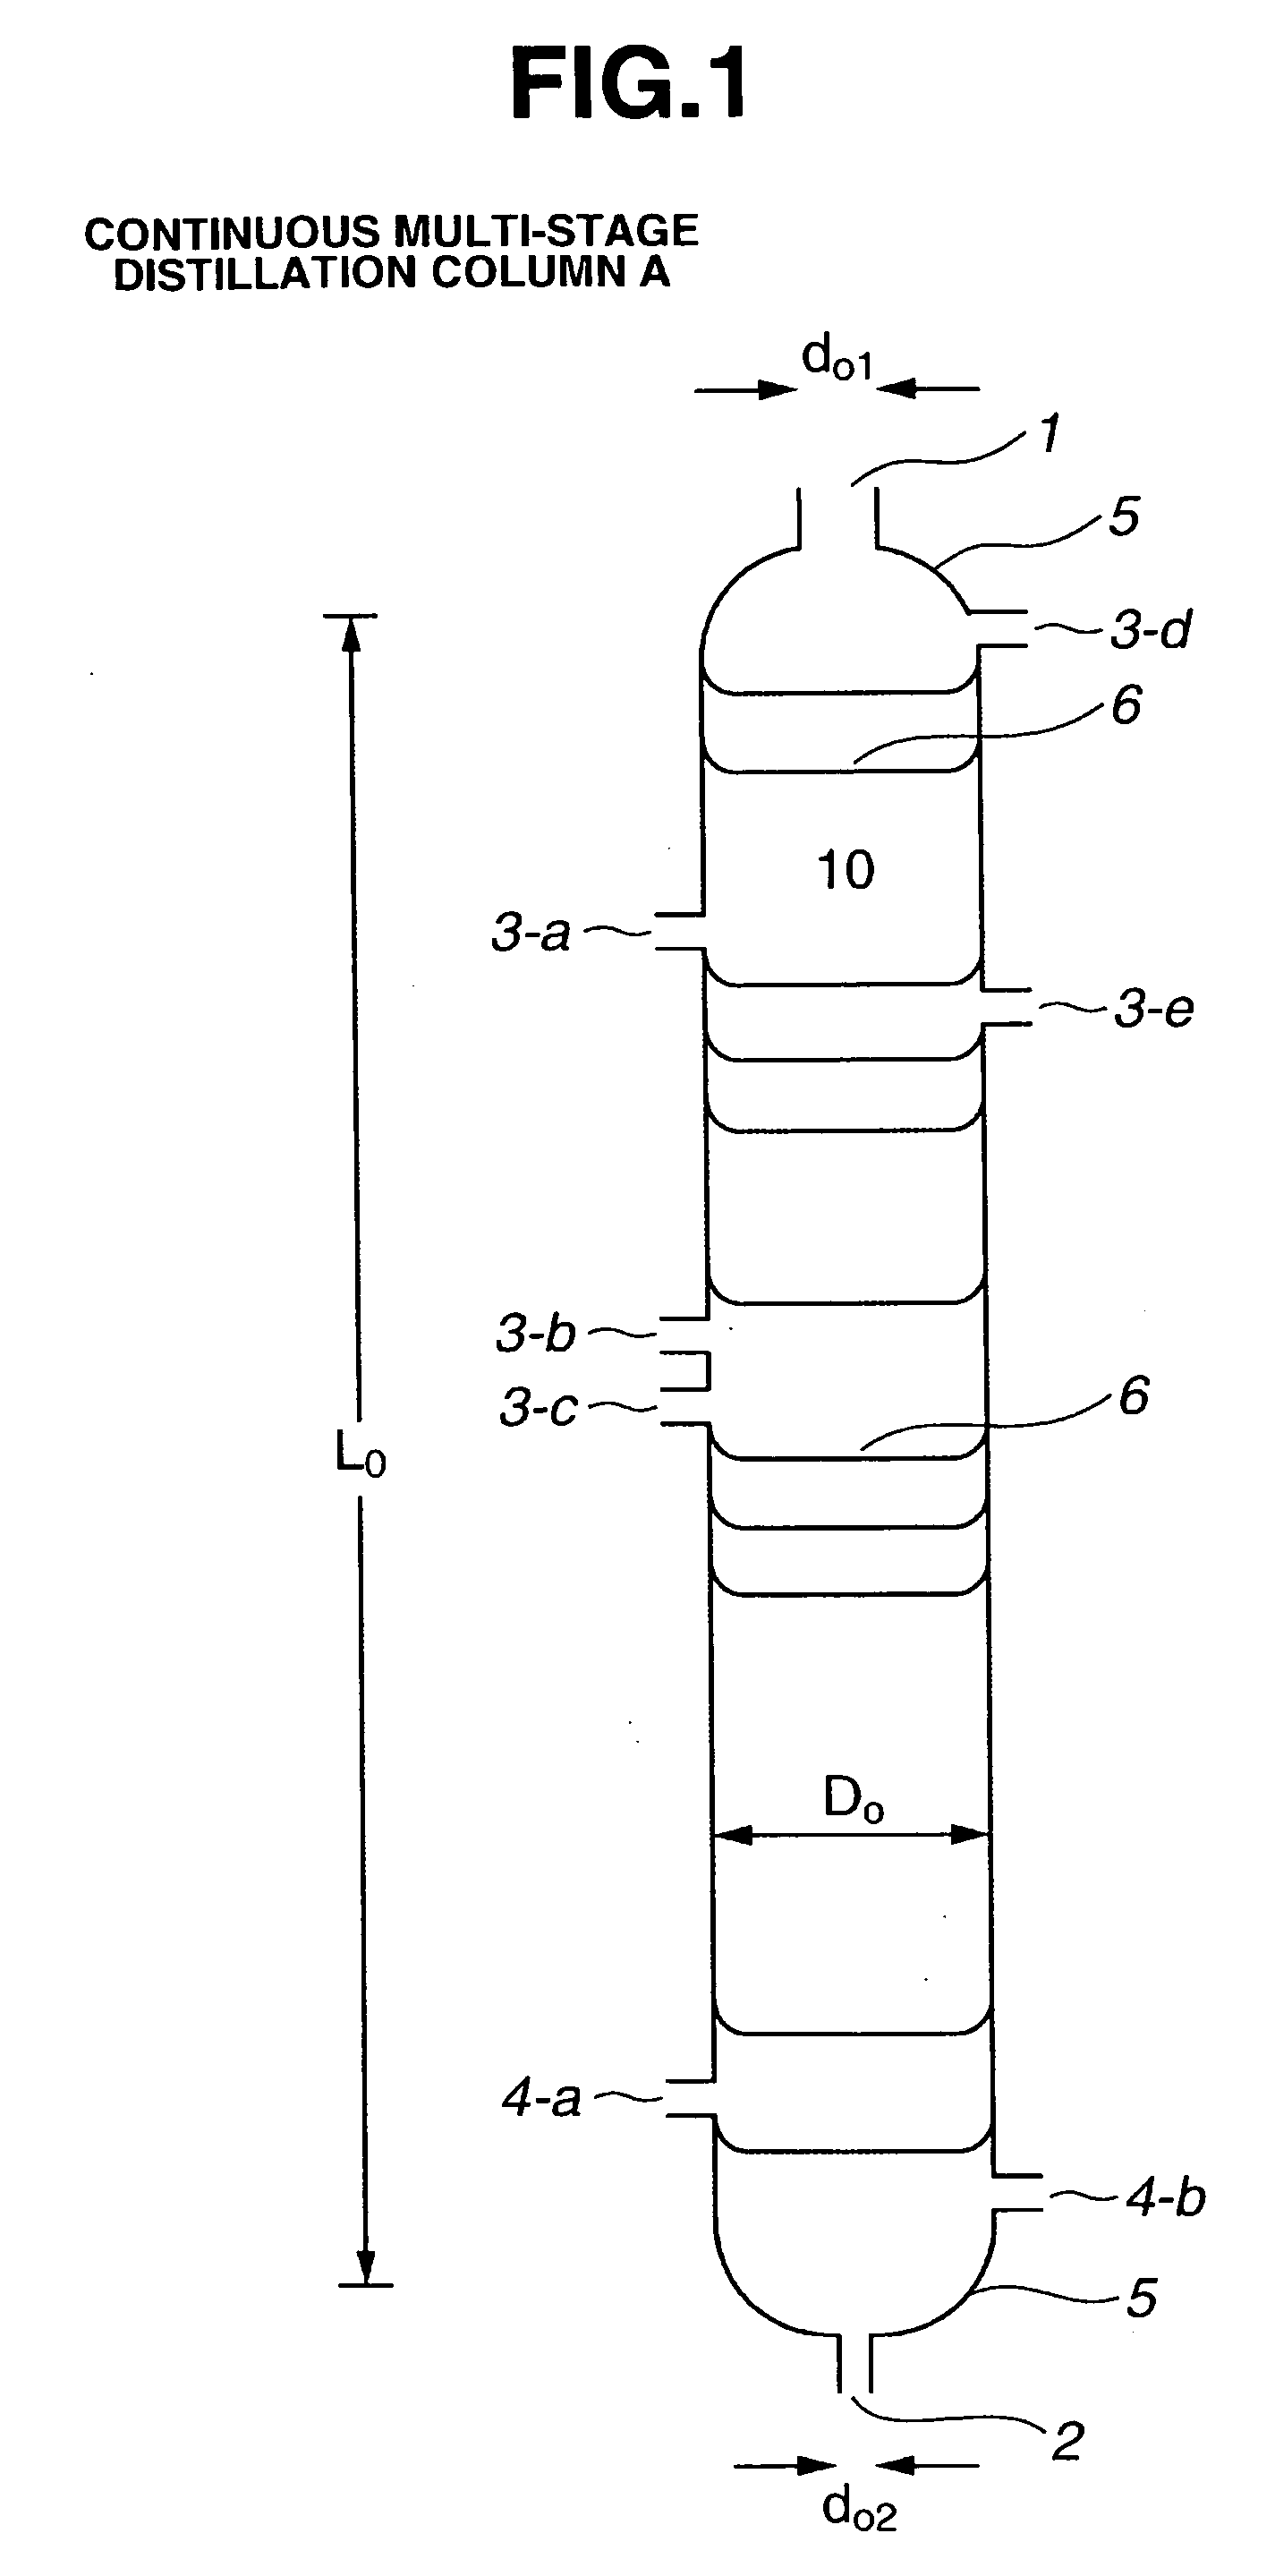 Industrial Process for Producing High-Purity Diol